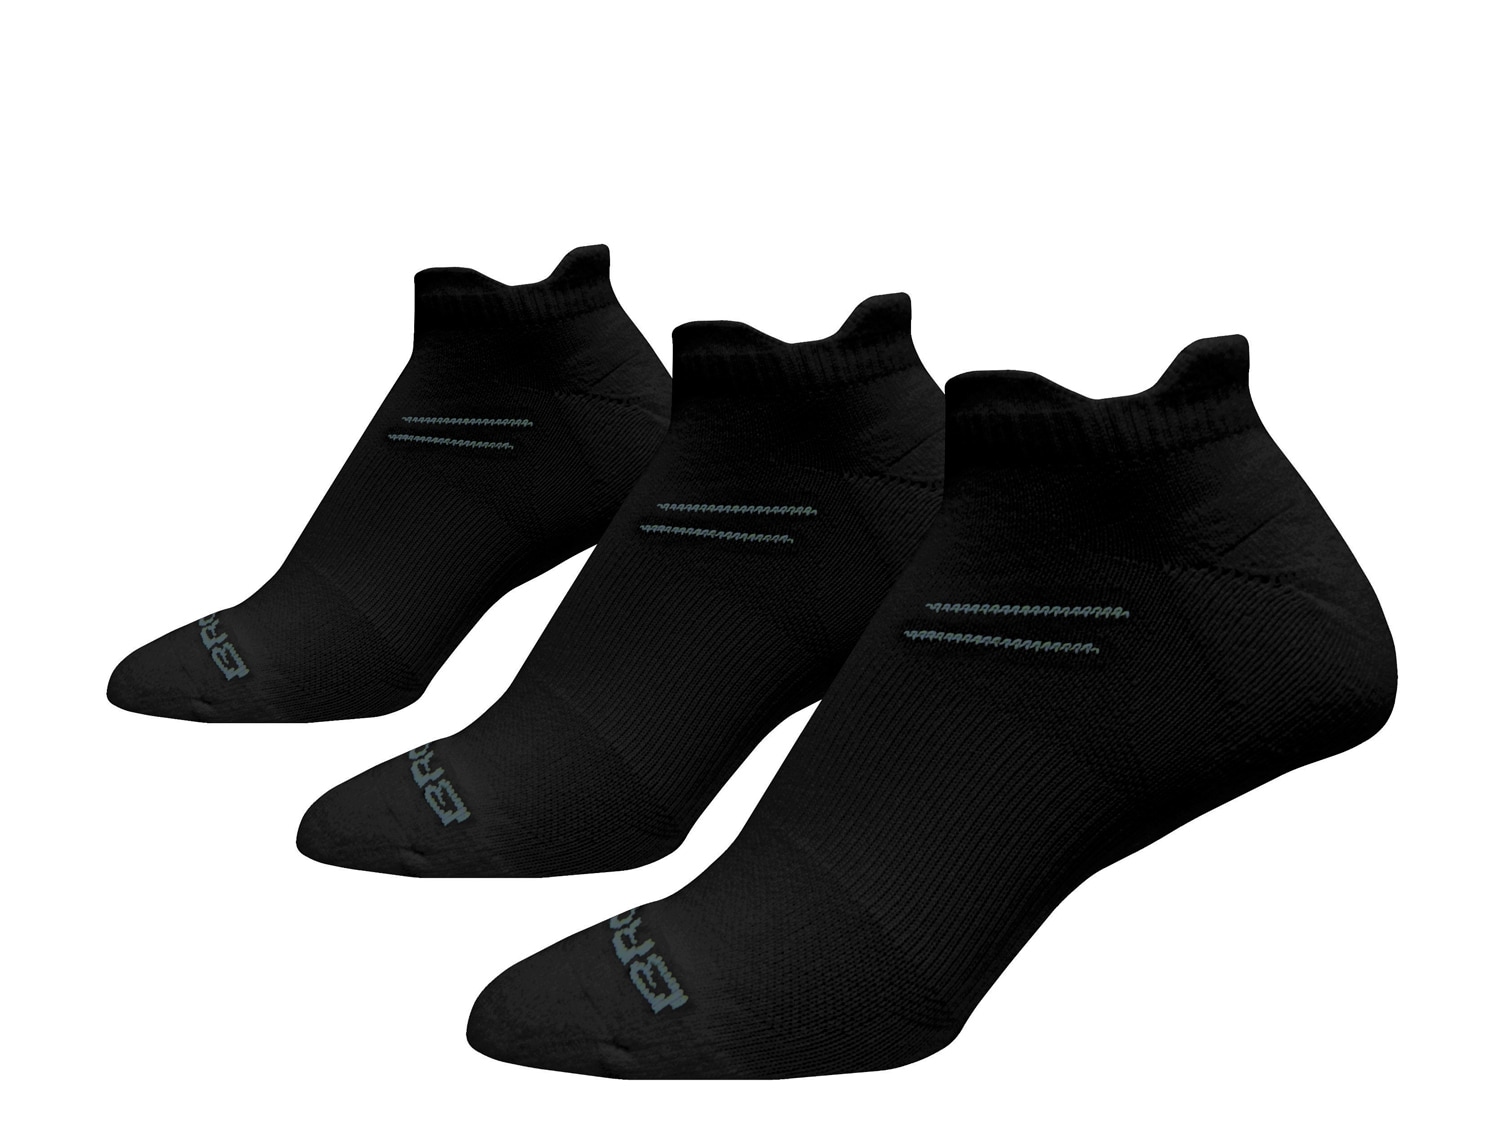 Run-In No Show Socks - 3 Pack Shipping | DSW